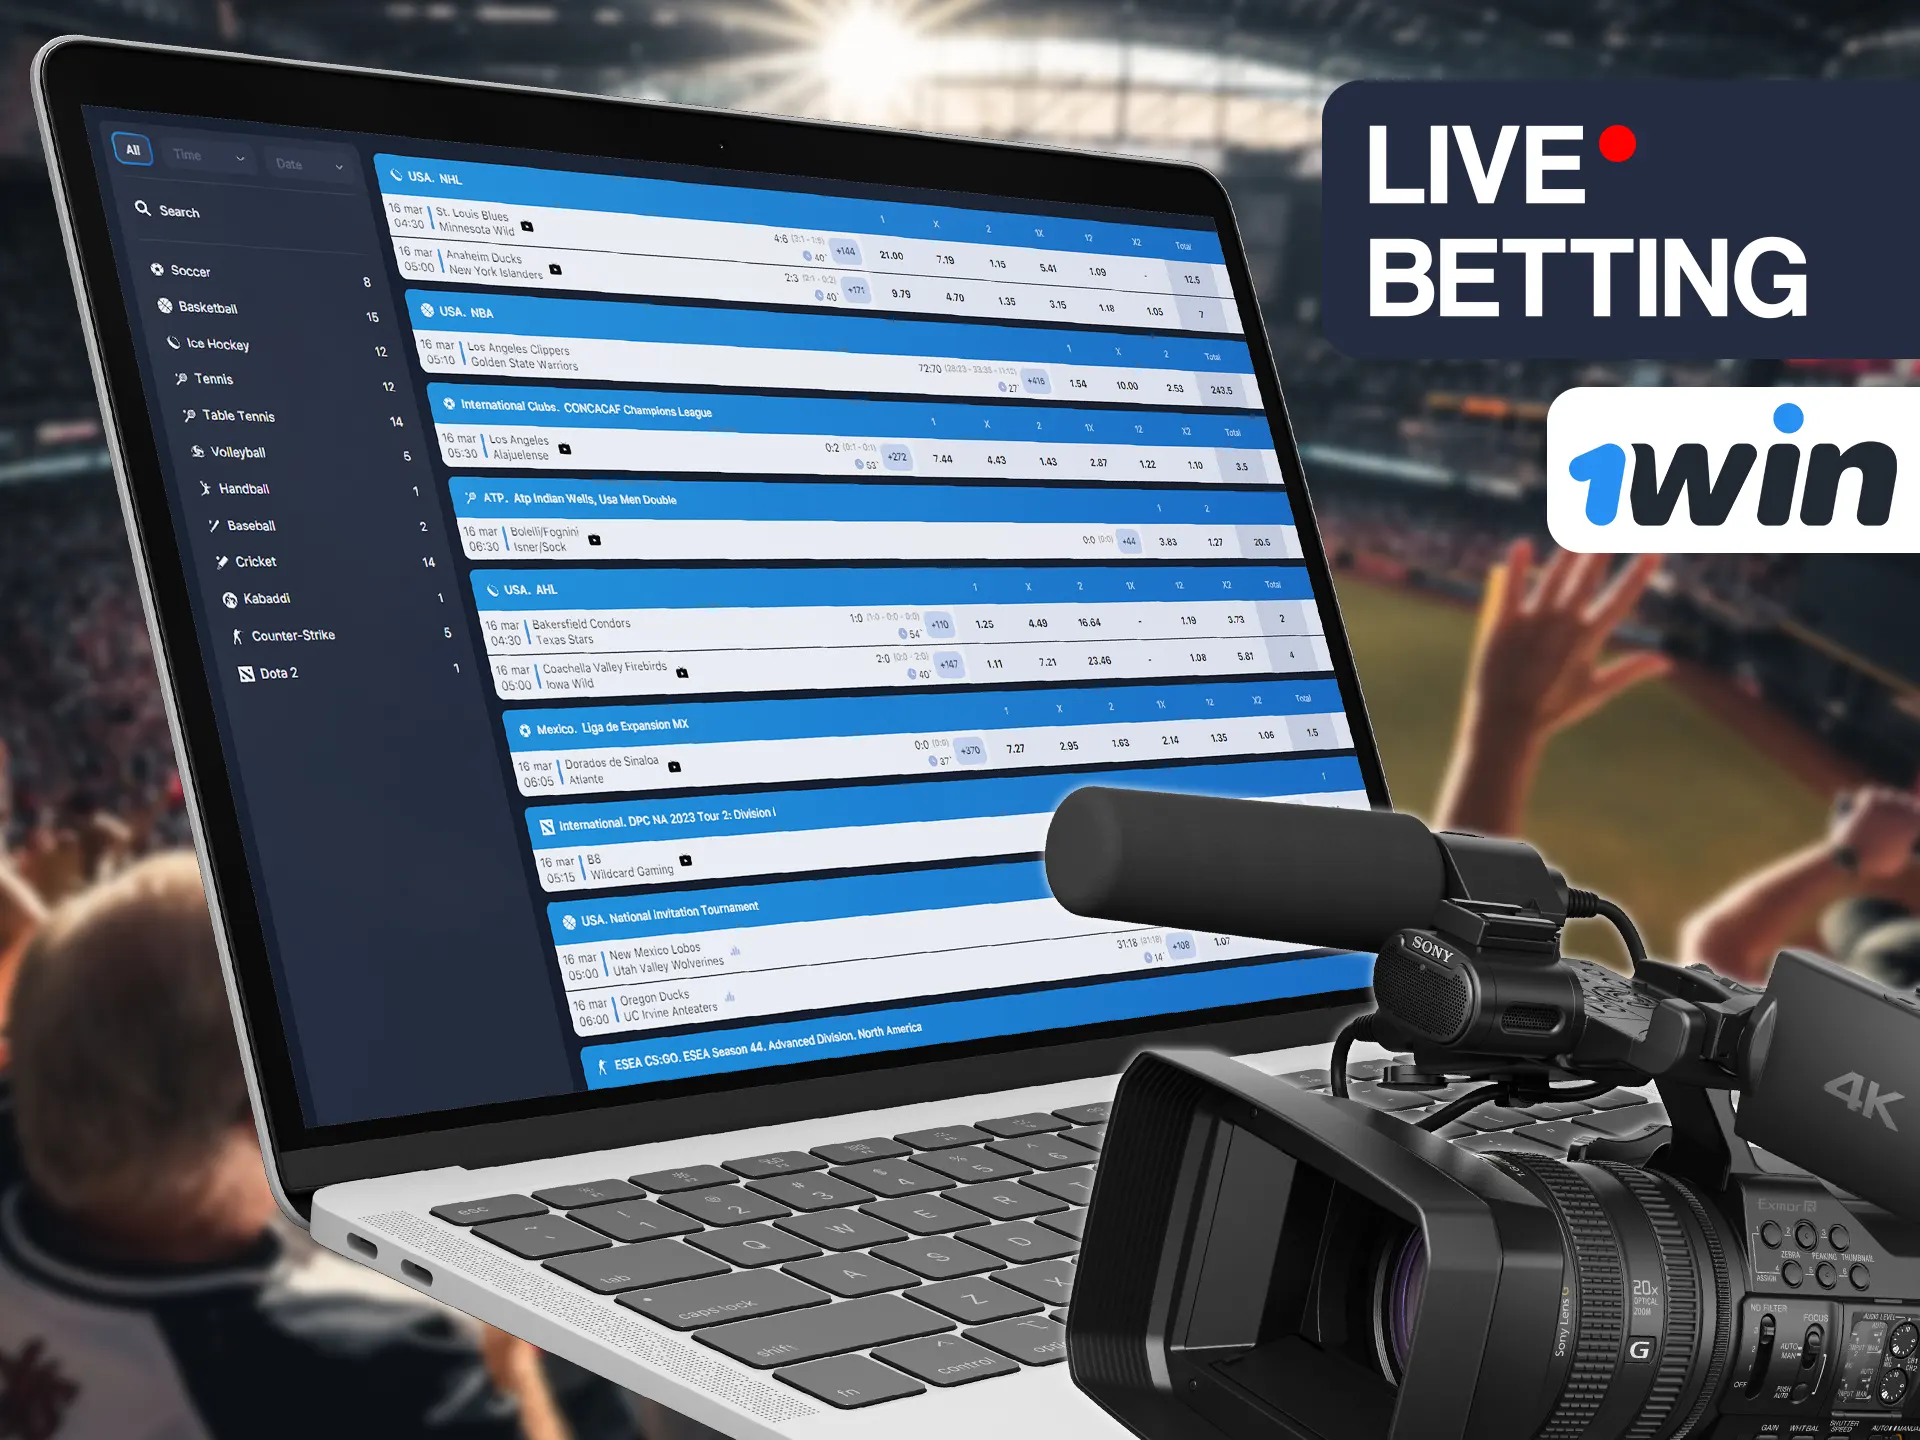 Bet on sports in live format at 1win.